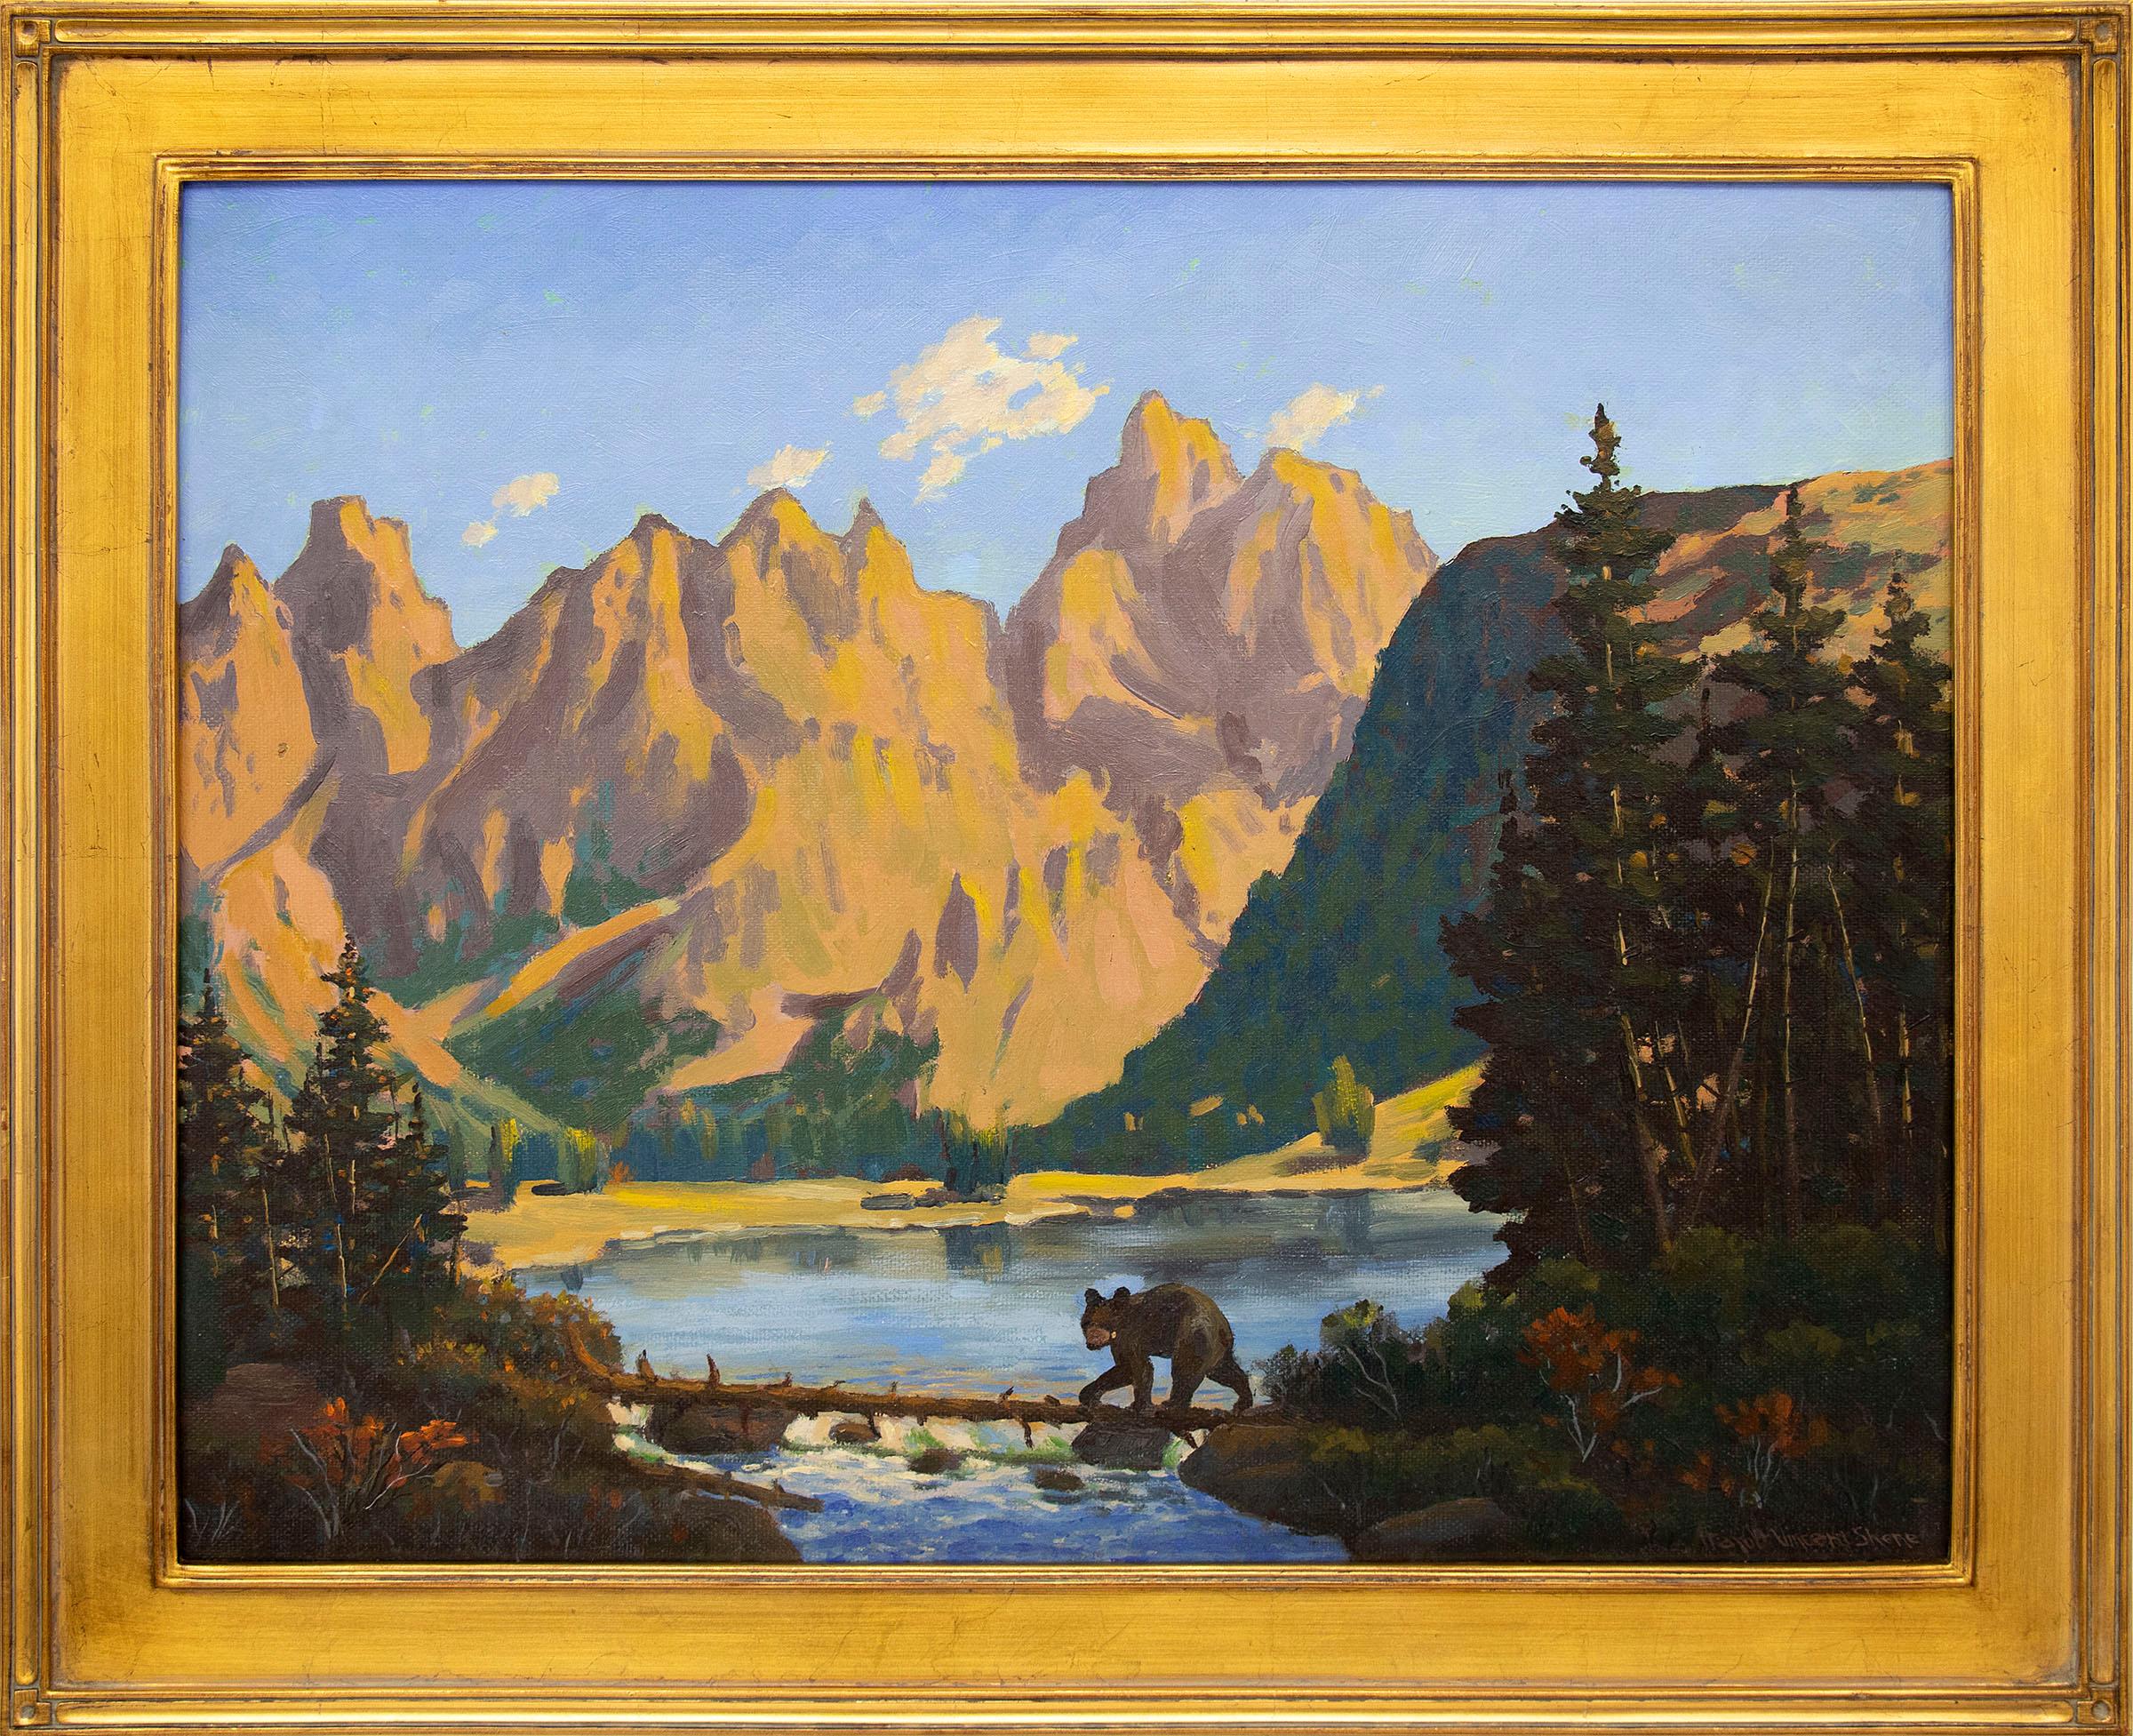 Little Bear (Traditional Landscape Painting with a Bear, Lake and Mountains)